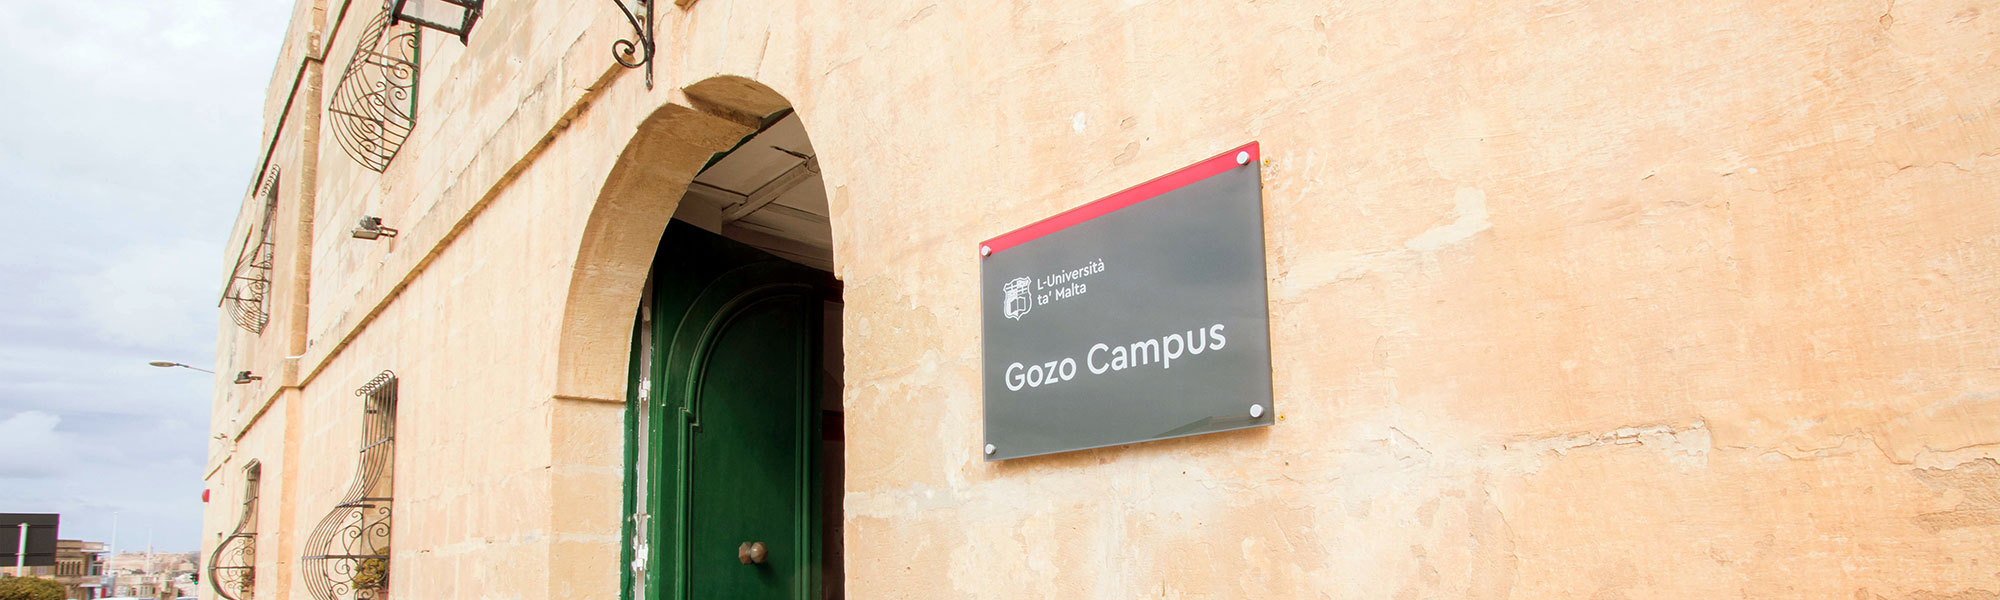 Entrance to the Gozo Campus showing the plaque on the outside